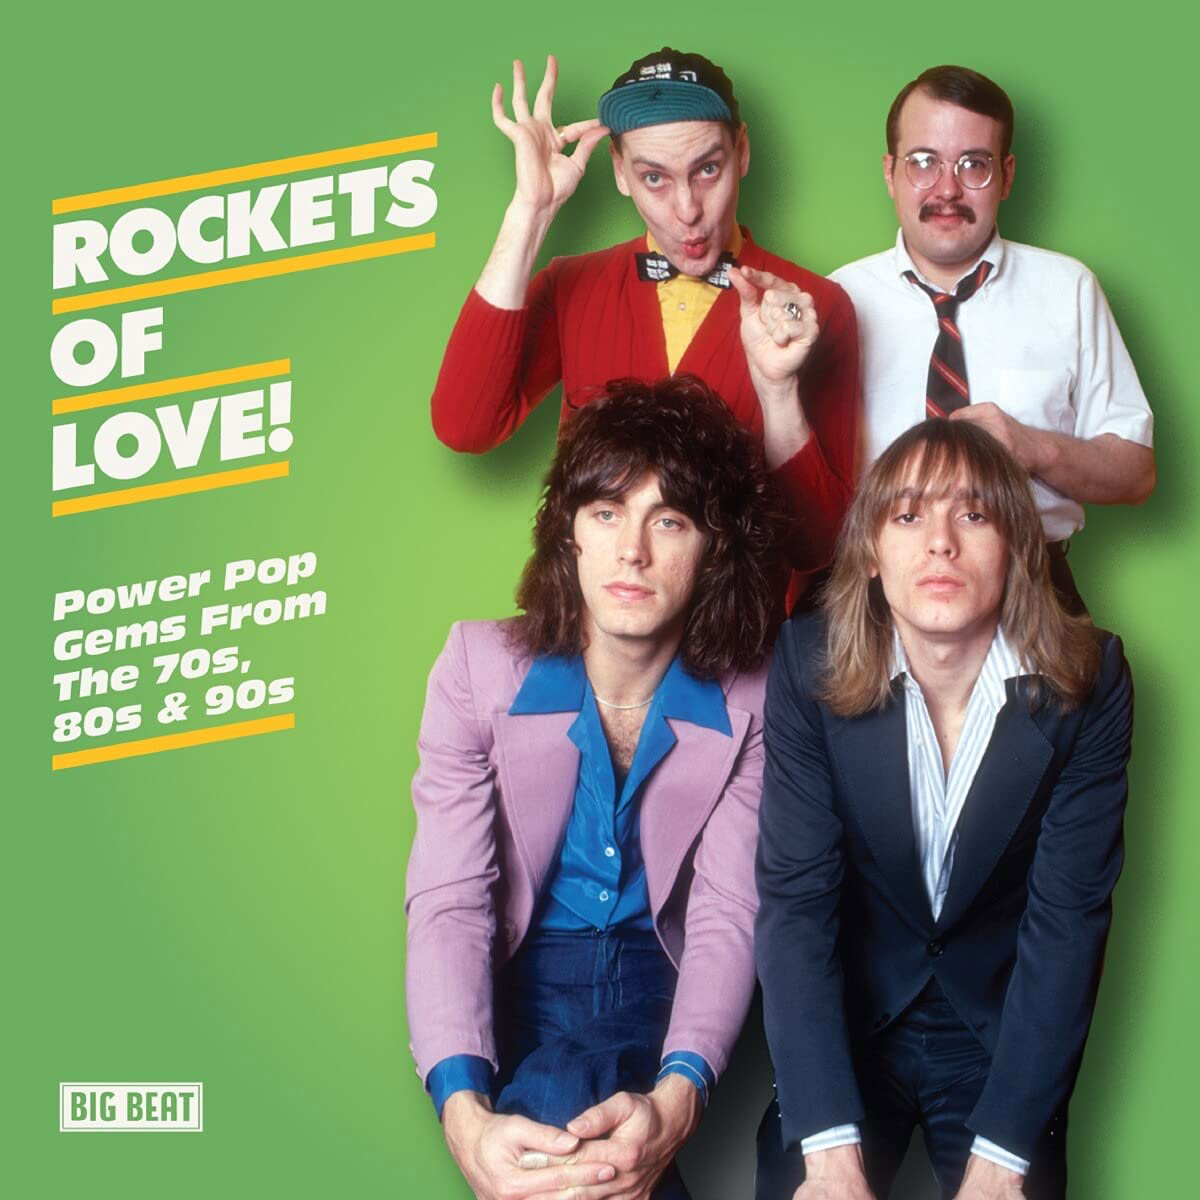 ckets of Love! Power Pop Gems from the 70s, 80s & 90s